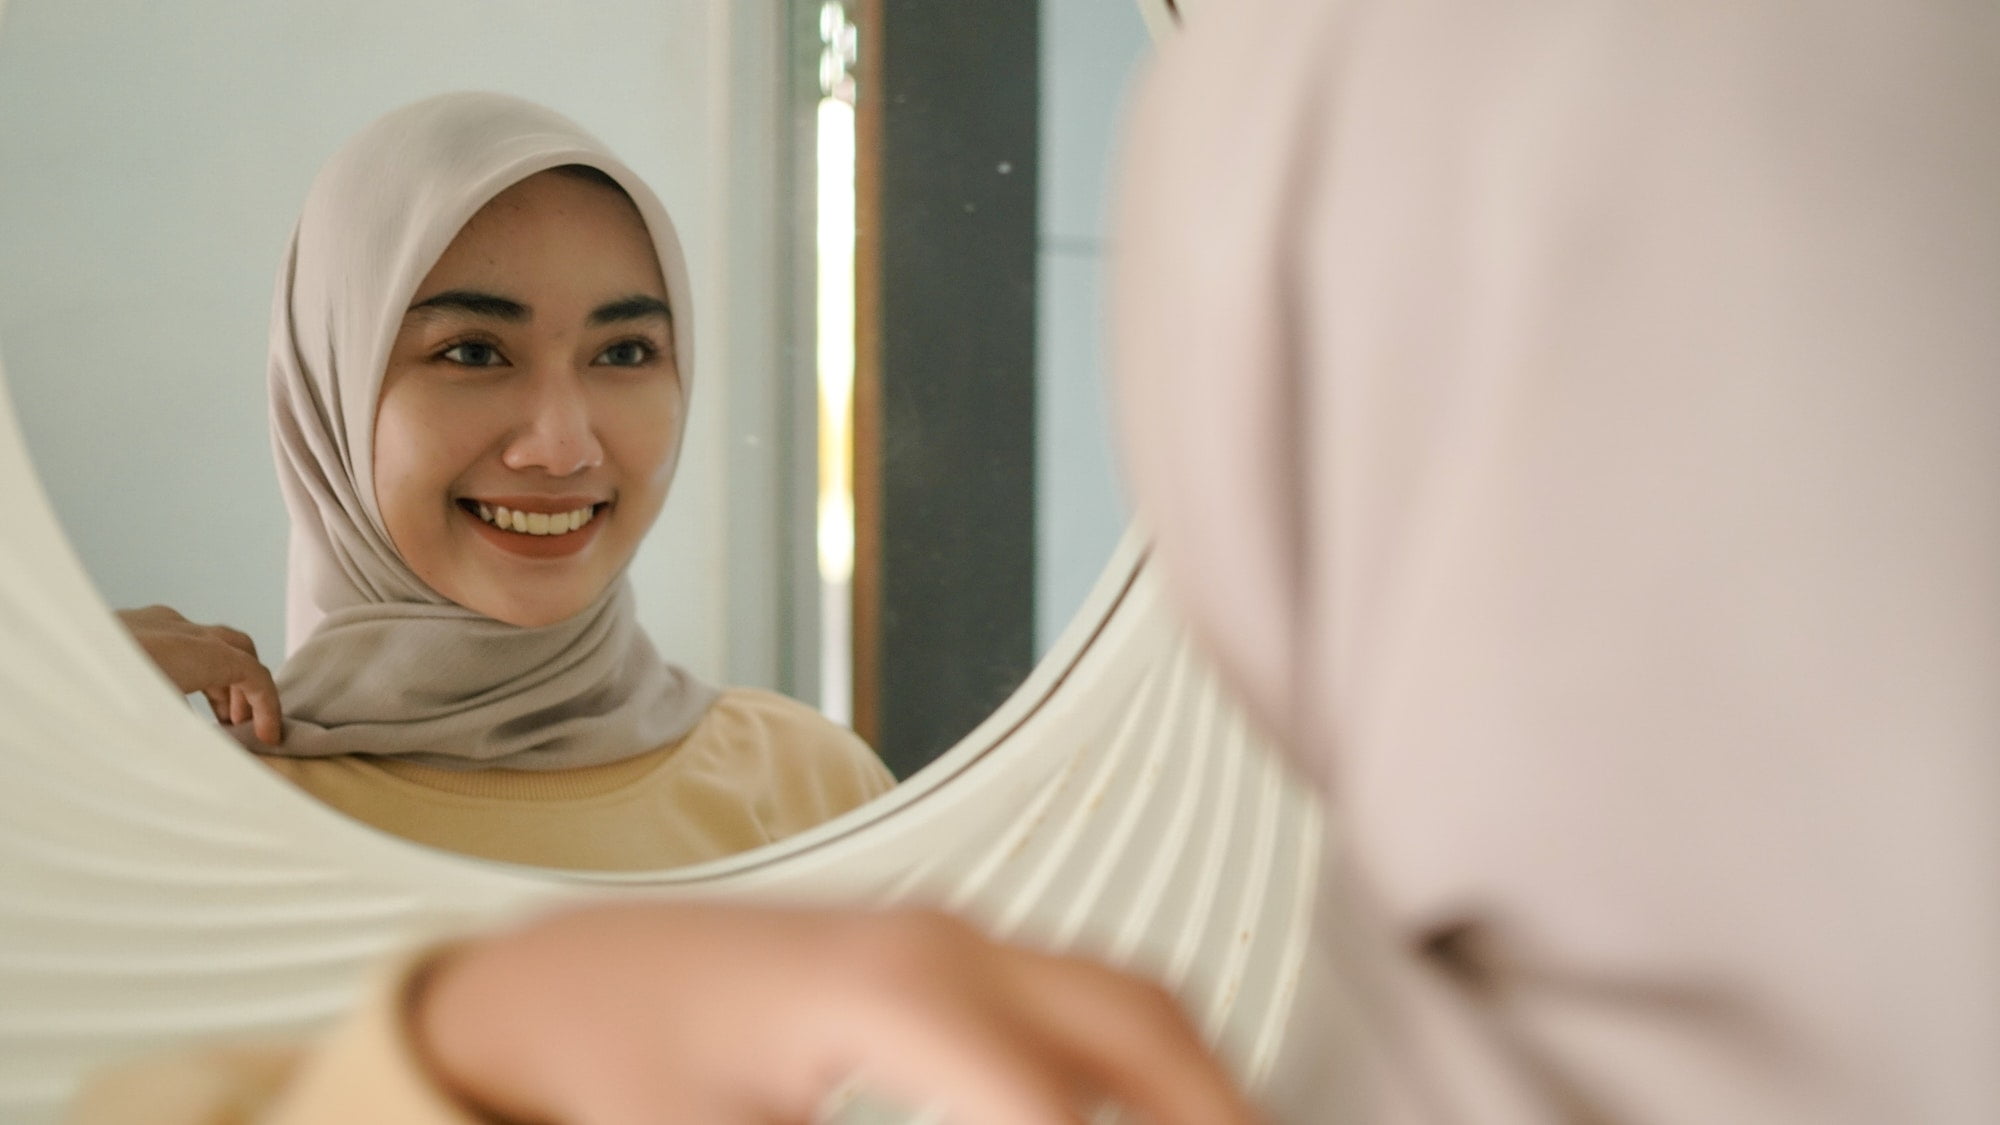 the beautiful young Muslim smiles sweetly in the mirror